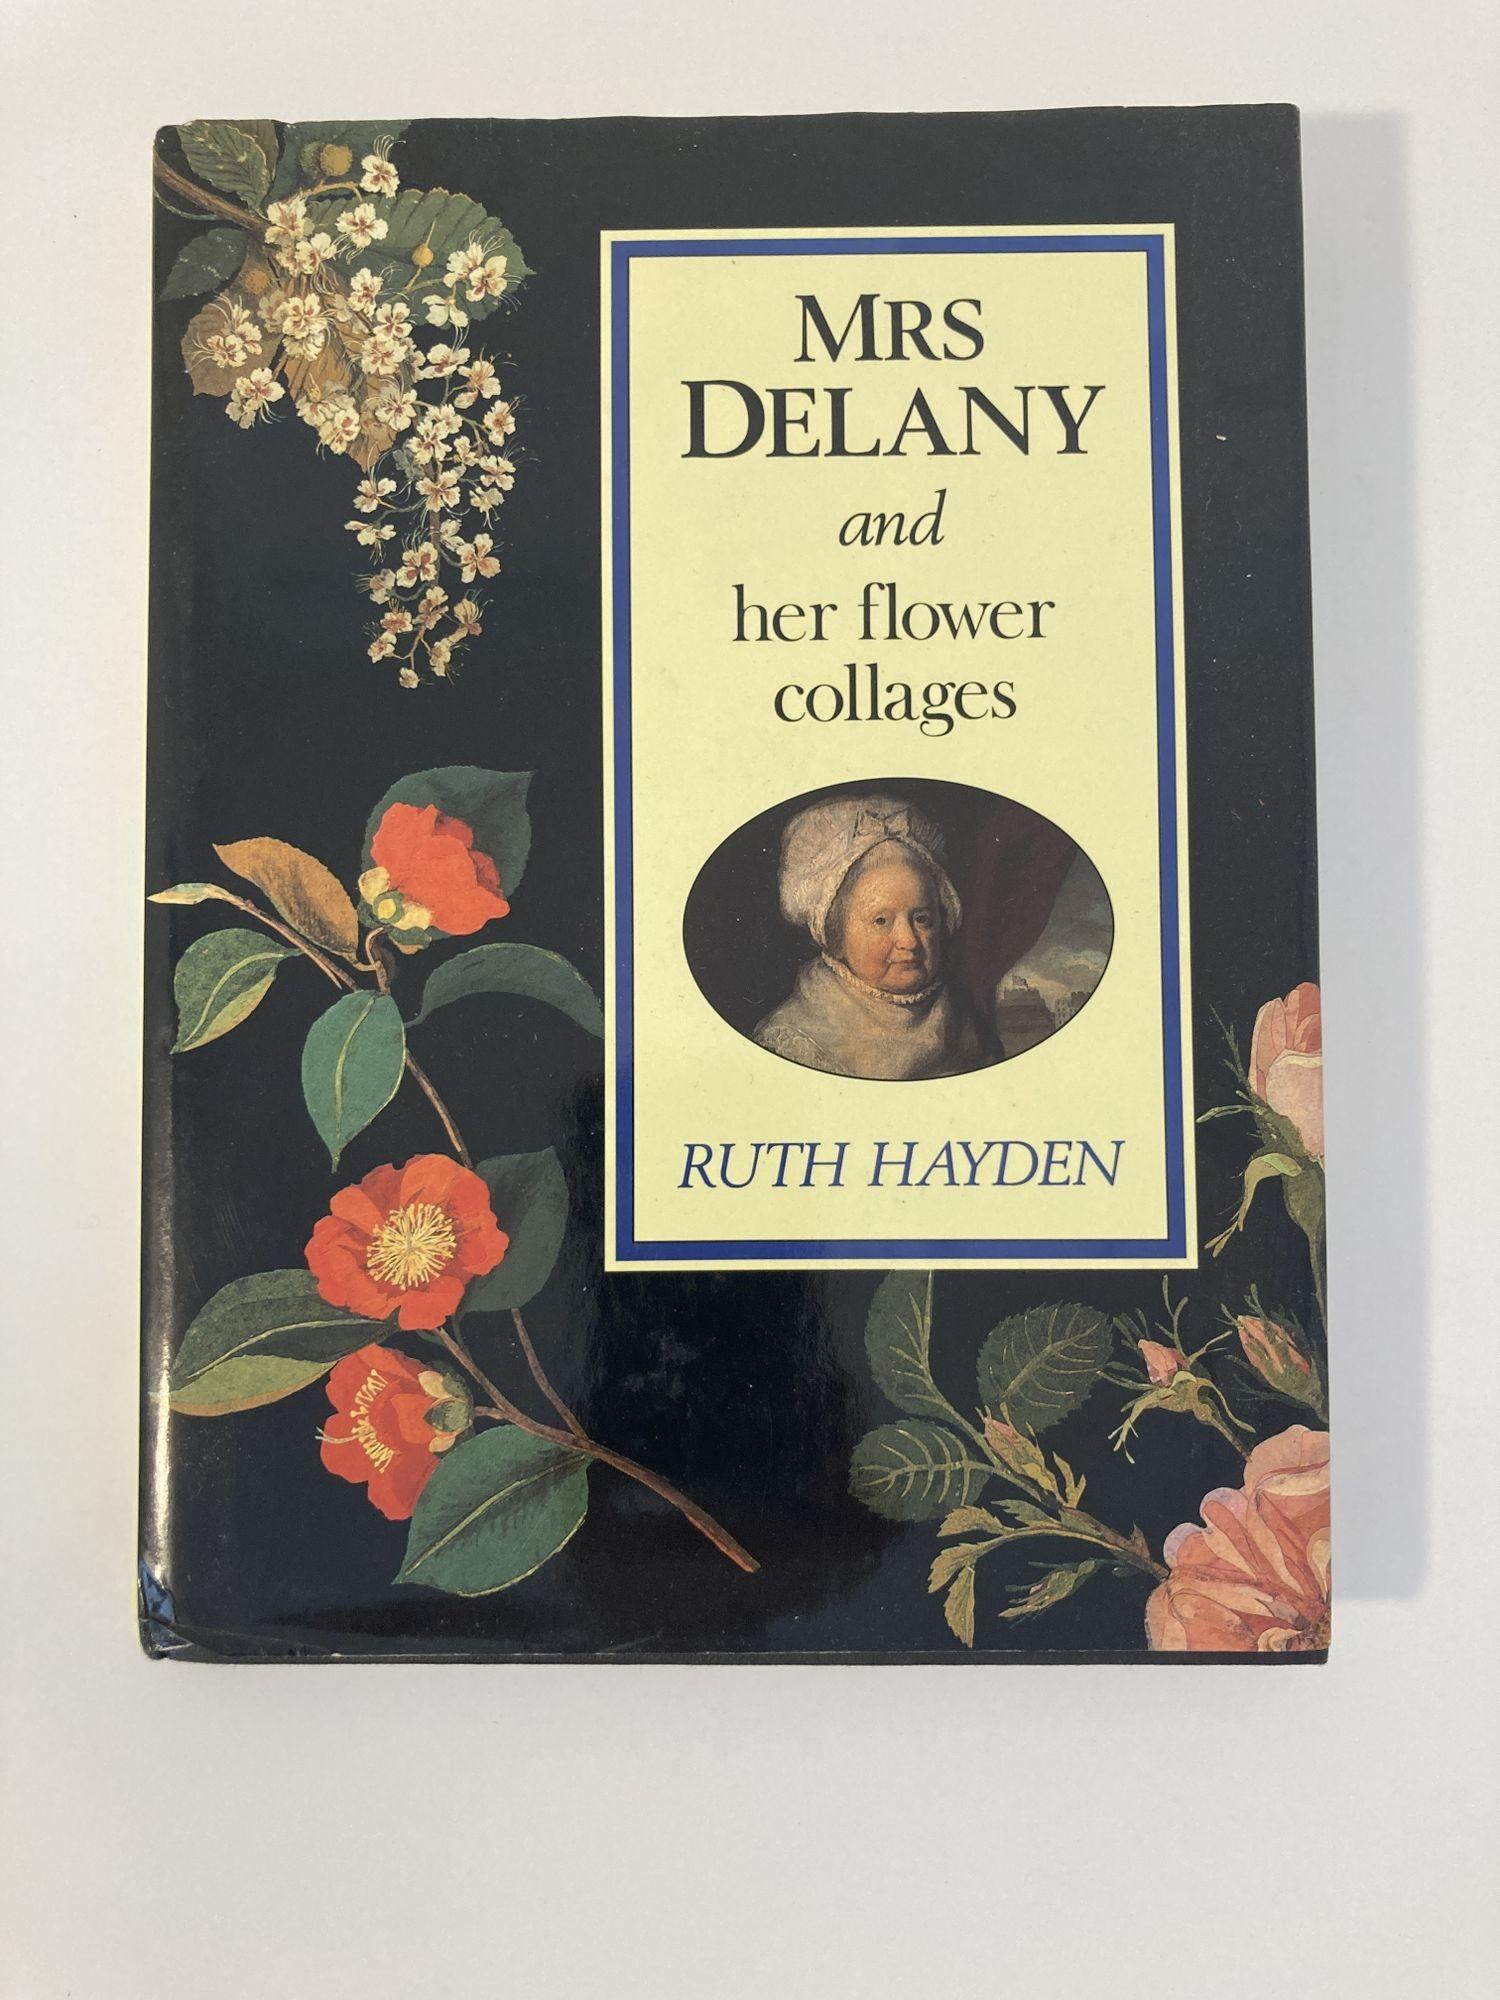 Mrs. Delany and Her Flower Collages Hardcover Book by Ruth Hayden 1992.
Mary Delany's 